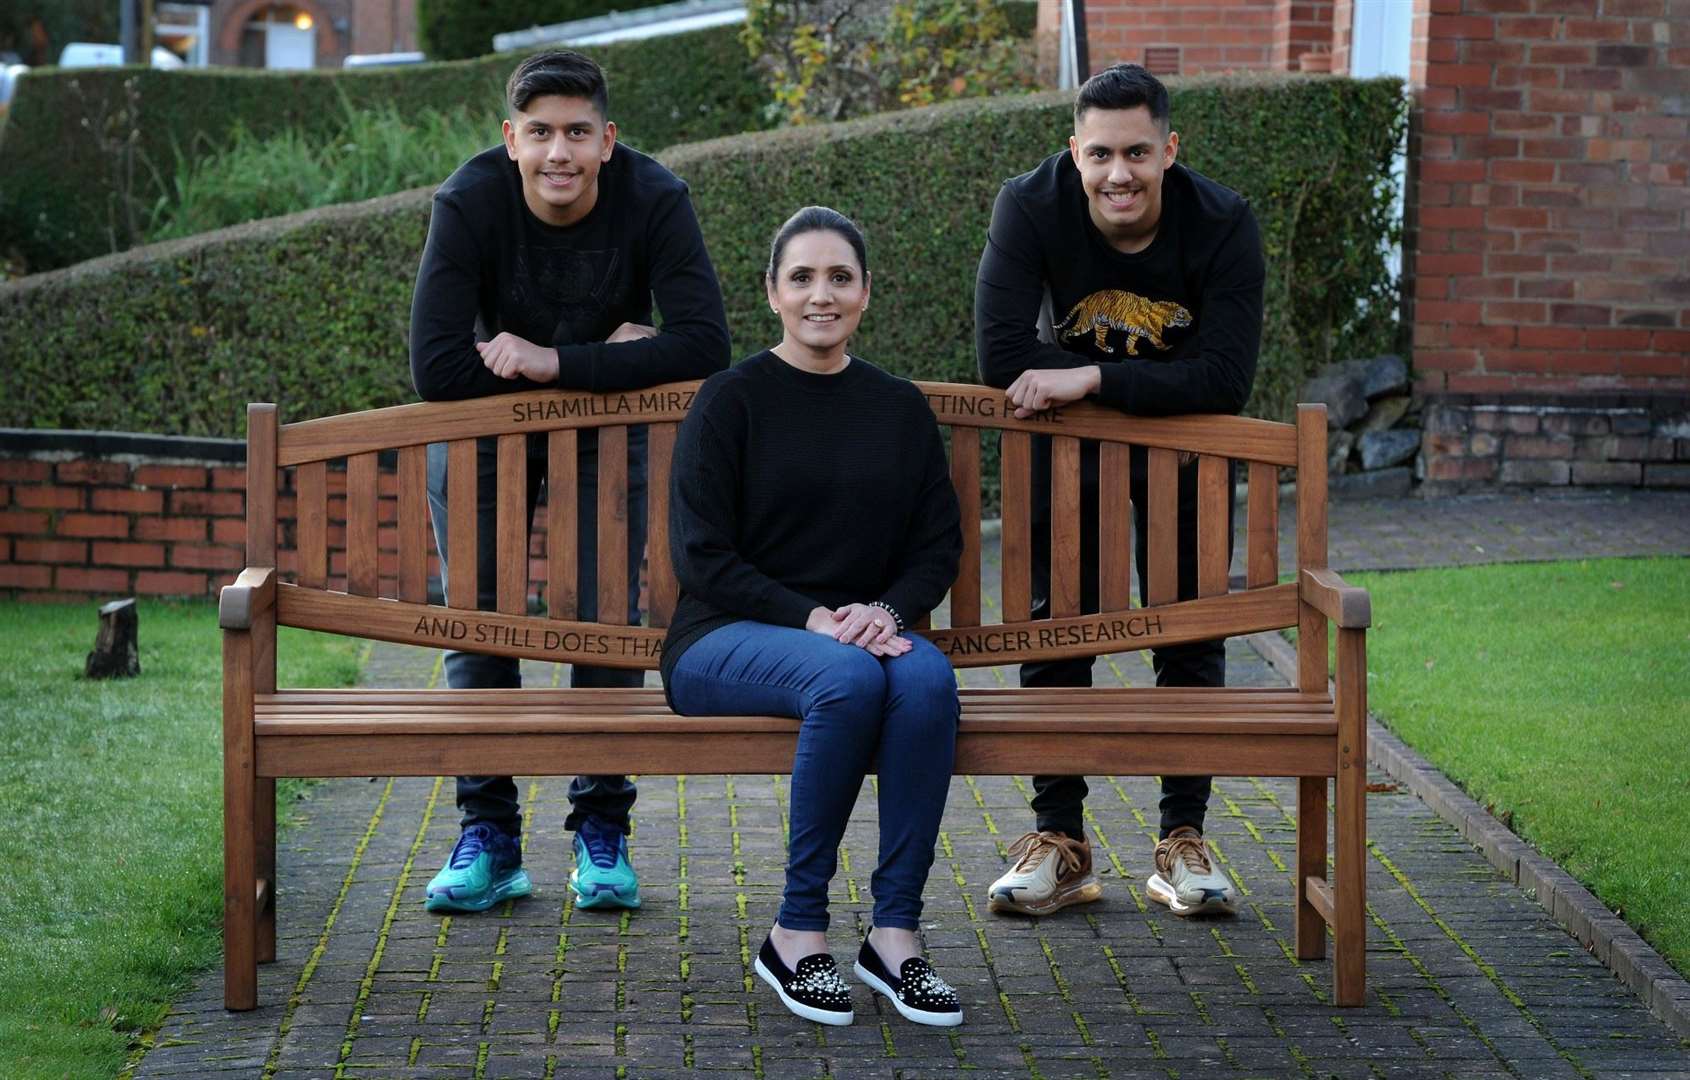 Shamilla Mirza with her named bench marking her recovery from cancer. Picture by Paul Heyes.